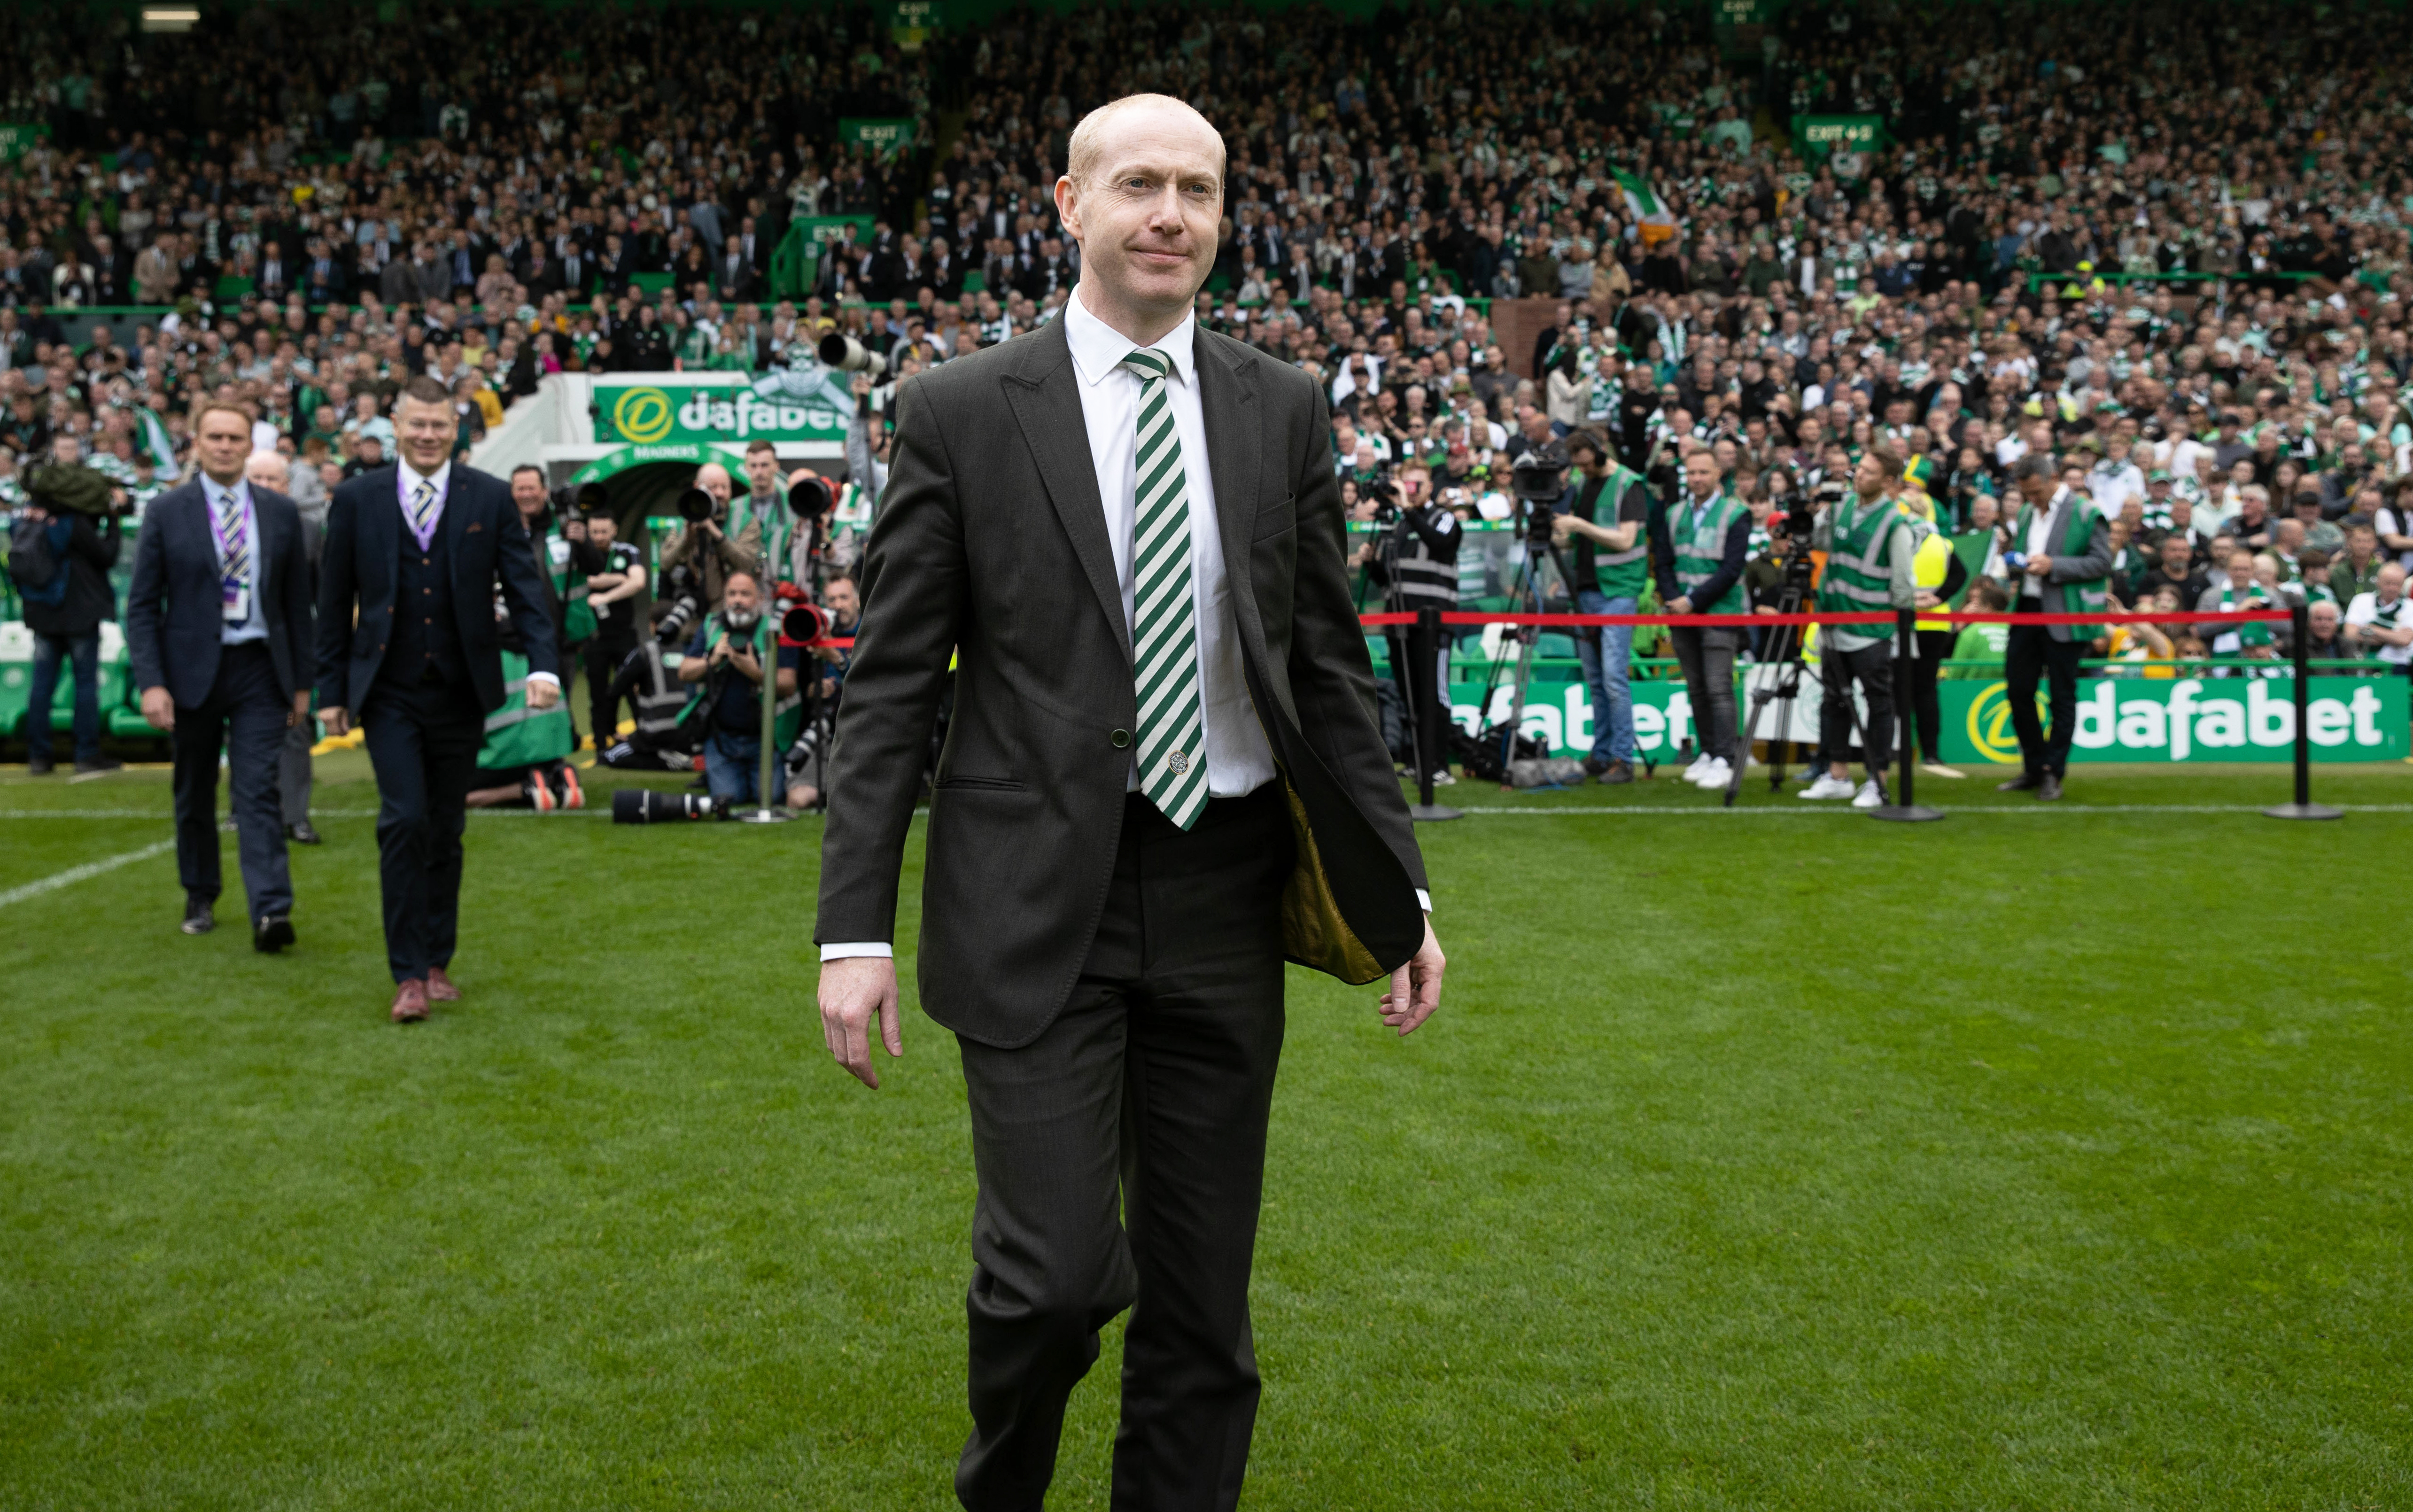 Celtic CEO vows Hoops will build from position of ‘strength and unity’ after Postecoglou exit